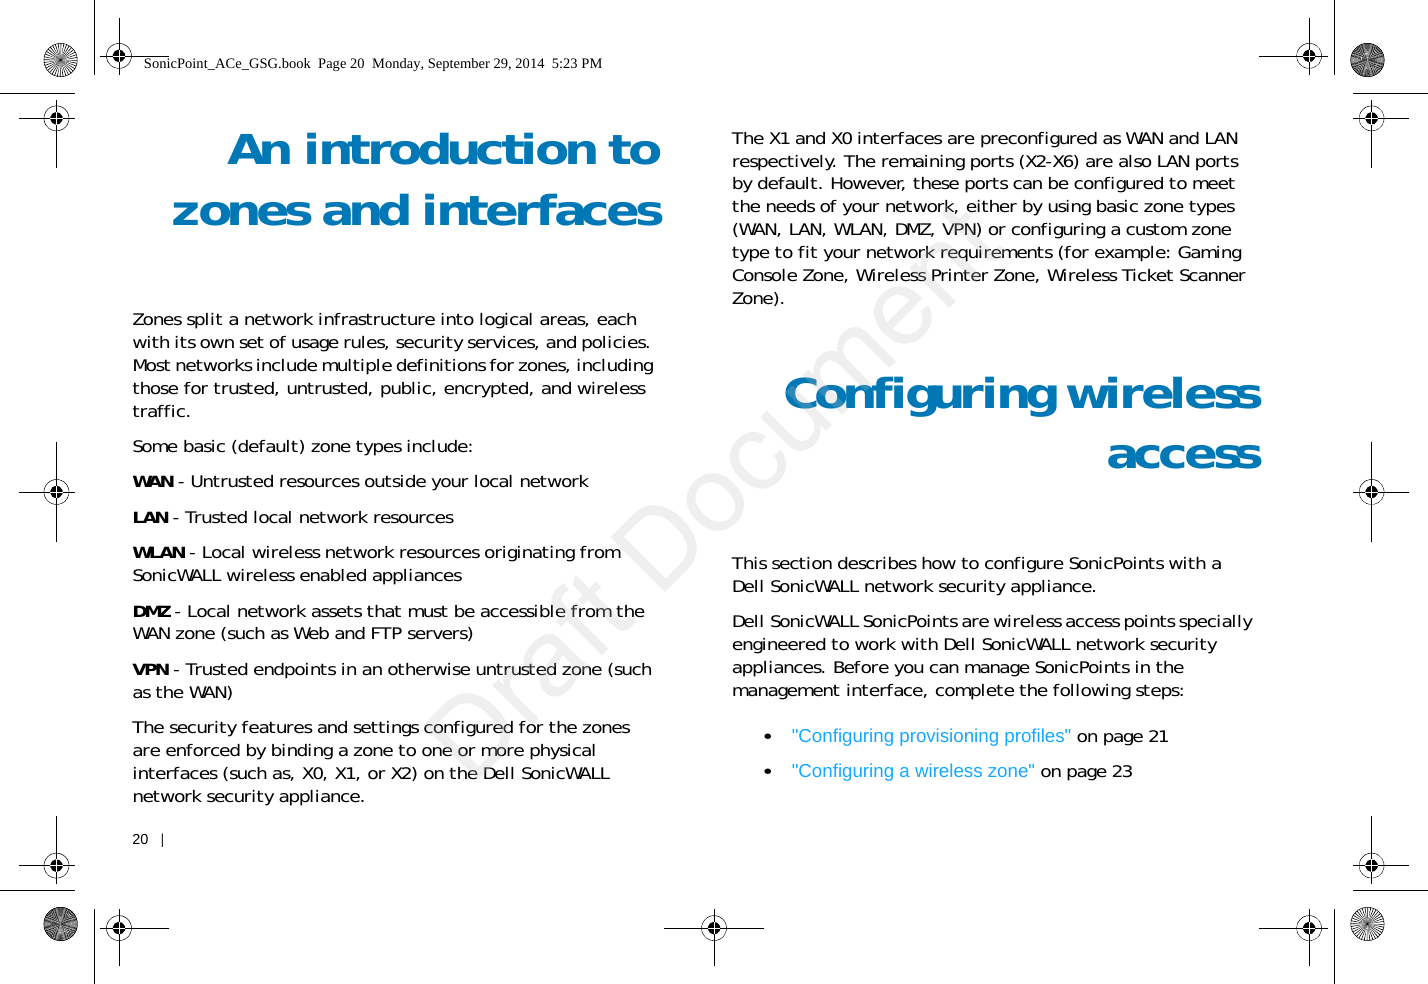 20   |   An introduction tozones and interfacesZones split a network infrastructure into logical areas, each with its own set of usage rules, security services, and policies. Most networks include multiple definitions for zones, including those for trusted, untrusted, public, encrypted, and wireless traffic.Some basic (default) zone types include:WAN - Untrusted resources outside your local networkLAN - Trusted local network resourcesWLAN - Local wireless network resources originating from SonicWALL wireless enabled appliancesDMZ - Local network assets that must be accessible from the WAN zone (such as Web and FTP servers)VPN - Trusted endpoints in an otherwise untrusted zone (such as the WAN)The security features and settings configured for the zones are enforced by binding a zone to one or more physical interfaces (such as, X0, X1, or X2) on the Dell SonicWALL network security appliance.The X1 and X0 interfaces are preconfigured as WAN and LAN respectively. The remaining ports (X2-X6) are also LAN ports by default. However, these ports can be configured to meet the needs of your network, either by using basic zone types (WAN, LAN, WLAN, DMZ, VPN) or configuring a custom zone type to fit your network requirements (for example: Gaming Console Zone, Wireless Printer Zone, Wireless Ticket Scanner Zone).Configuring wirelessaccessThis section describes how to configure SonicPoints with a Dell SonicWALL network security appliance. Dell SonicWALL SonicPoints are wireless access points specially engineered to work with Dell SonicWALL network security appliances. Before you can manage SonicPoints in the management interface, complete the following steps: •&quot;Configuring provisioning profiles&quot; on page 21•&quot;Configuring a wireless zone&quot; on page 23SonicPoint_ACe_GSG.book  Page 20  Monday, September 29, 2014  5:23 PMDraft Document